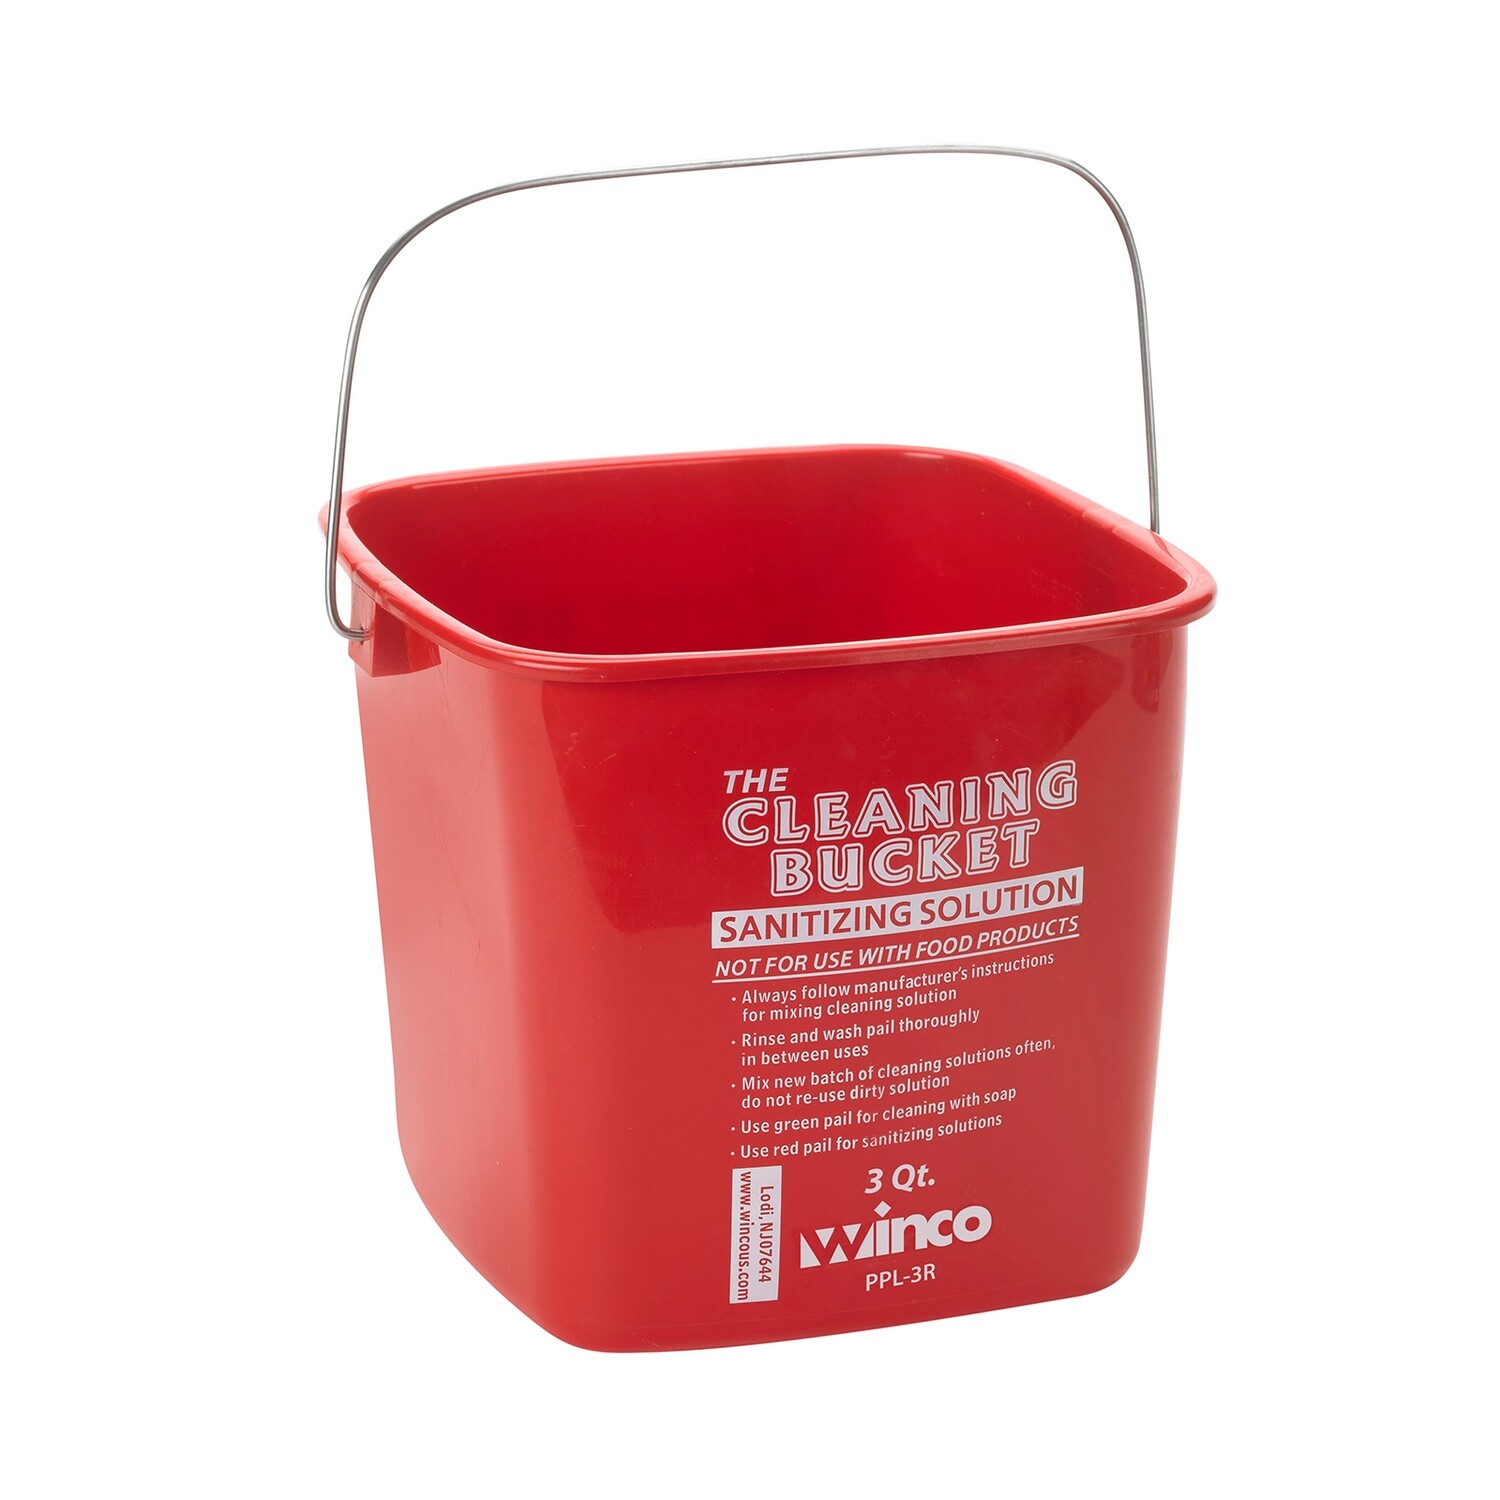 Winco PPL-3R Cleaning Bucket for Sanitizing Solution, Polypropylene, Red, 3 qt.